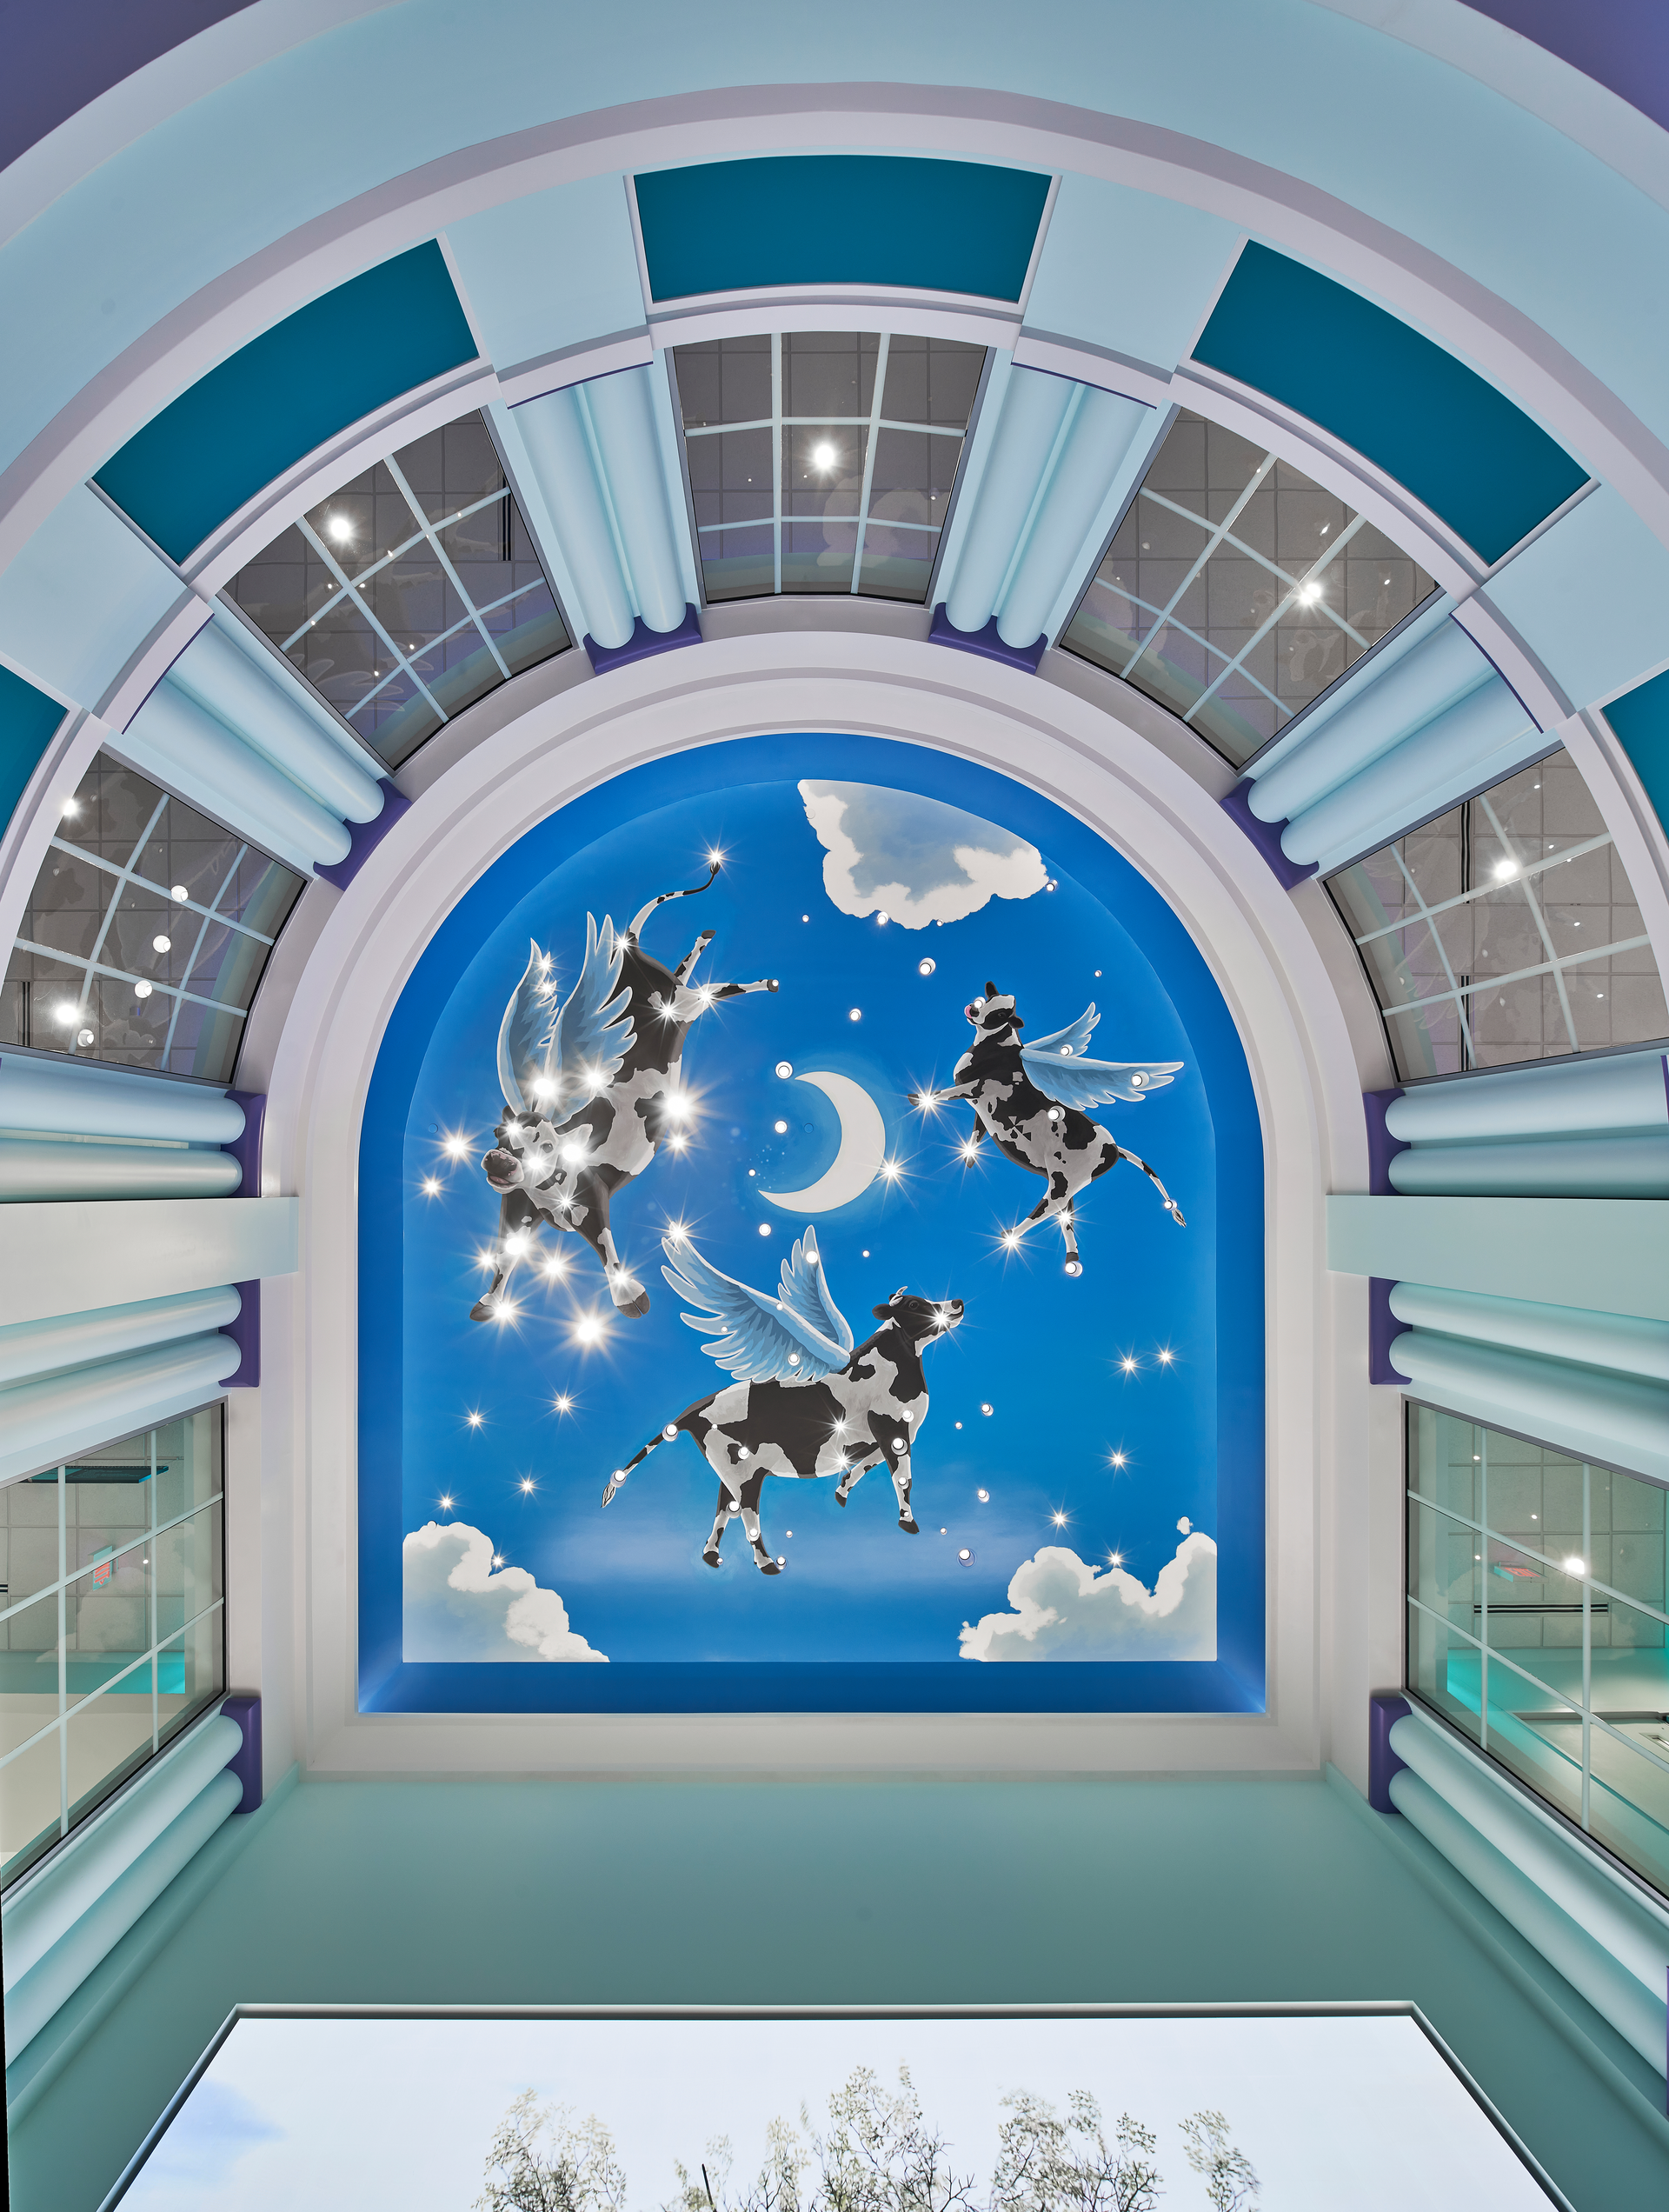 Image of painted cows on a ceiling with stars moon and clouds